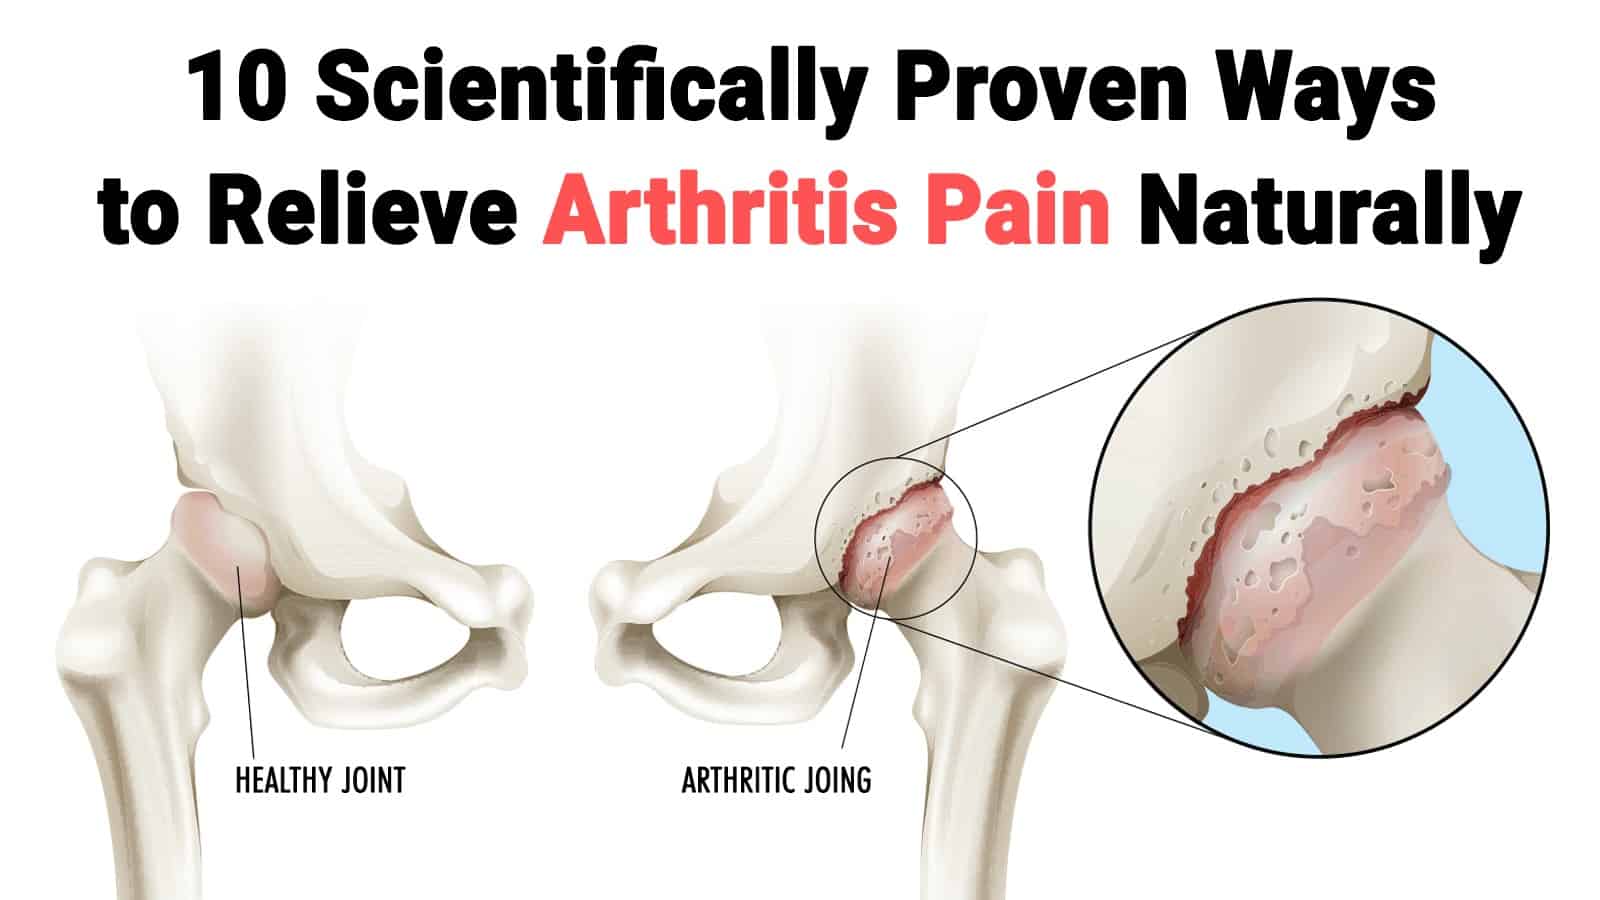 10 Scientifically Proven Ways to Relieve Arthritis Pain Naturally